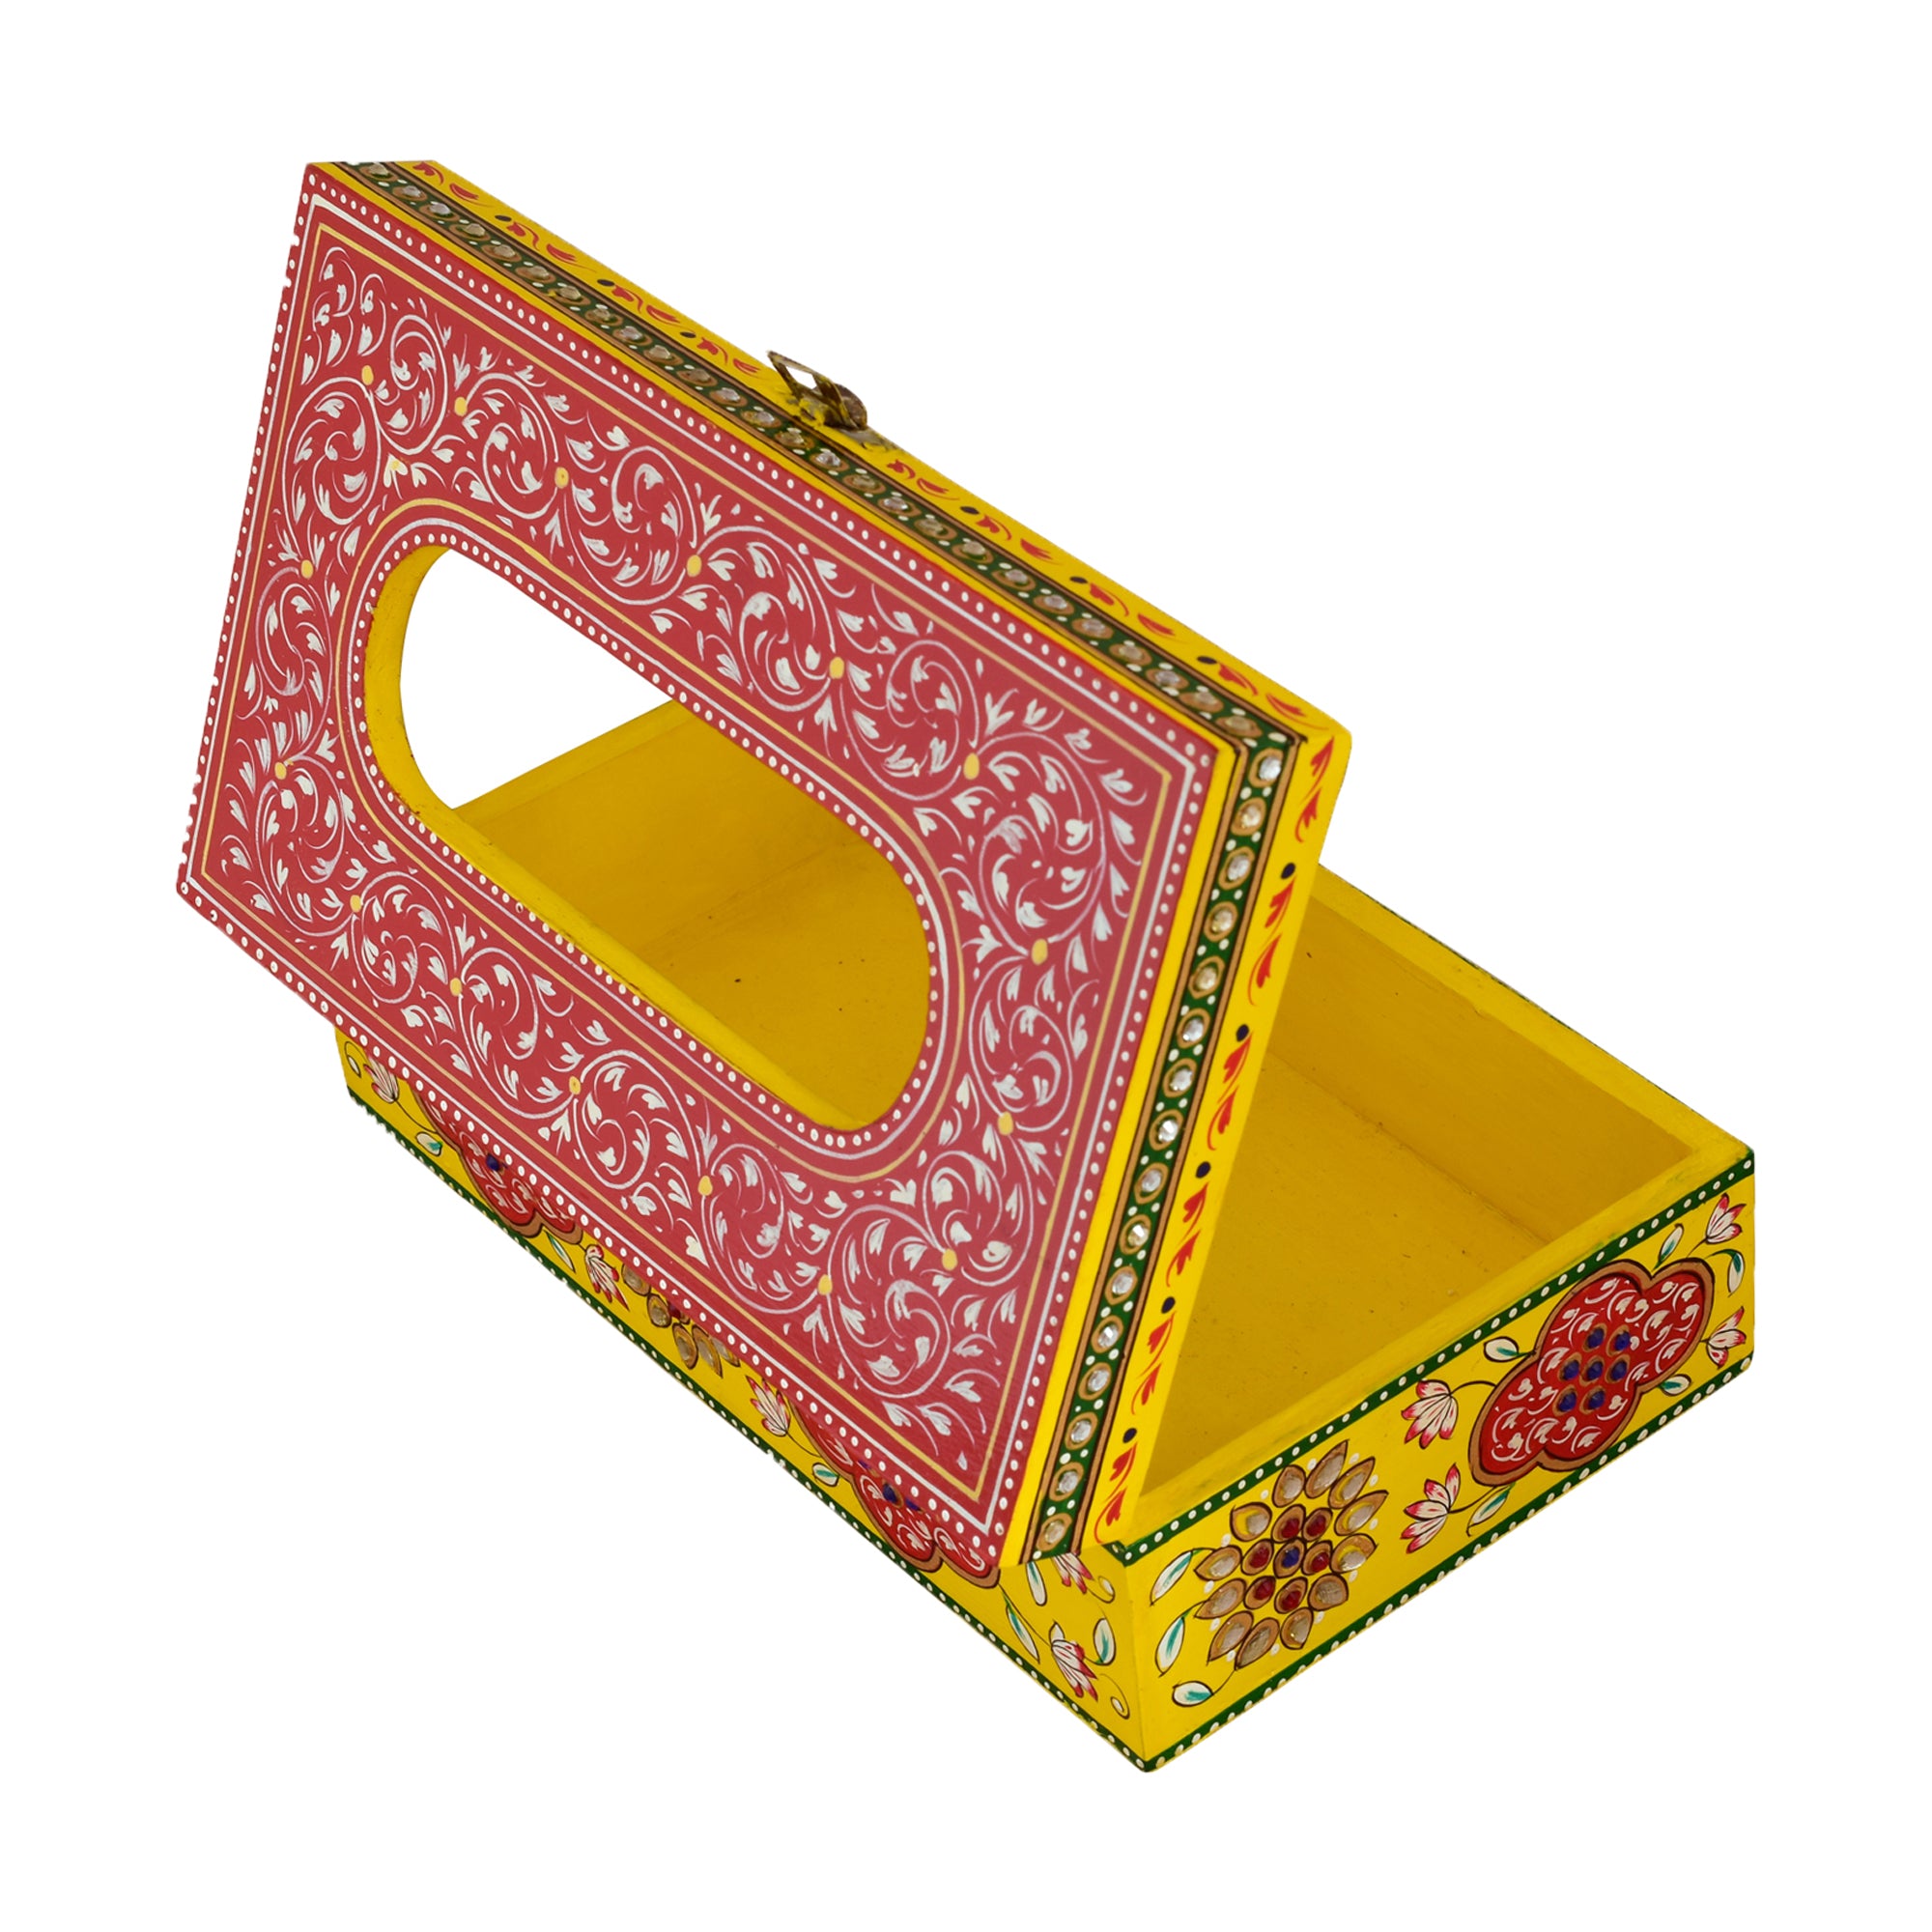  hand painted tissue box